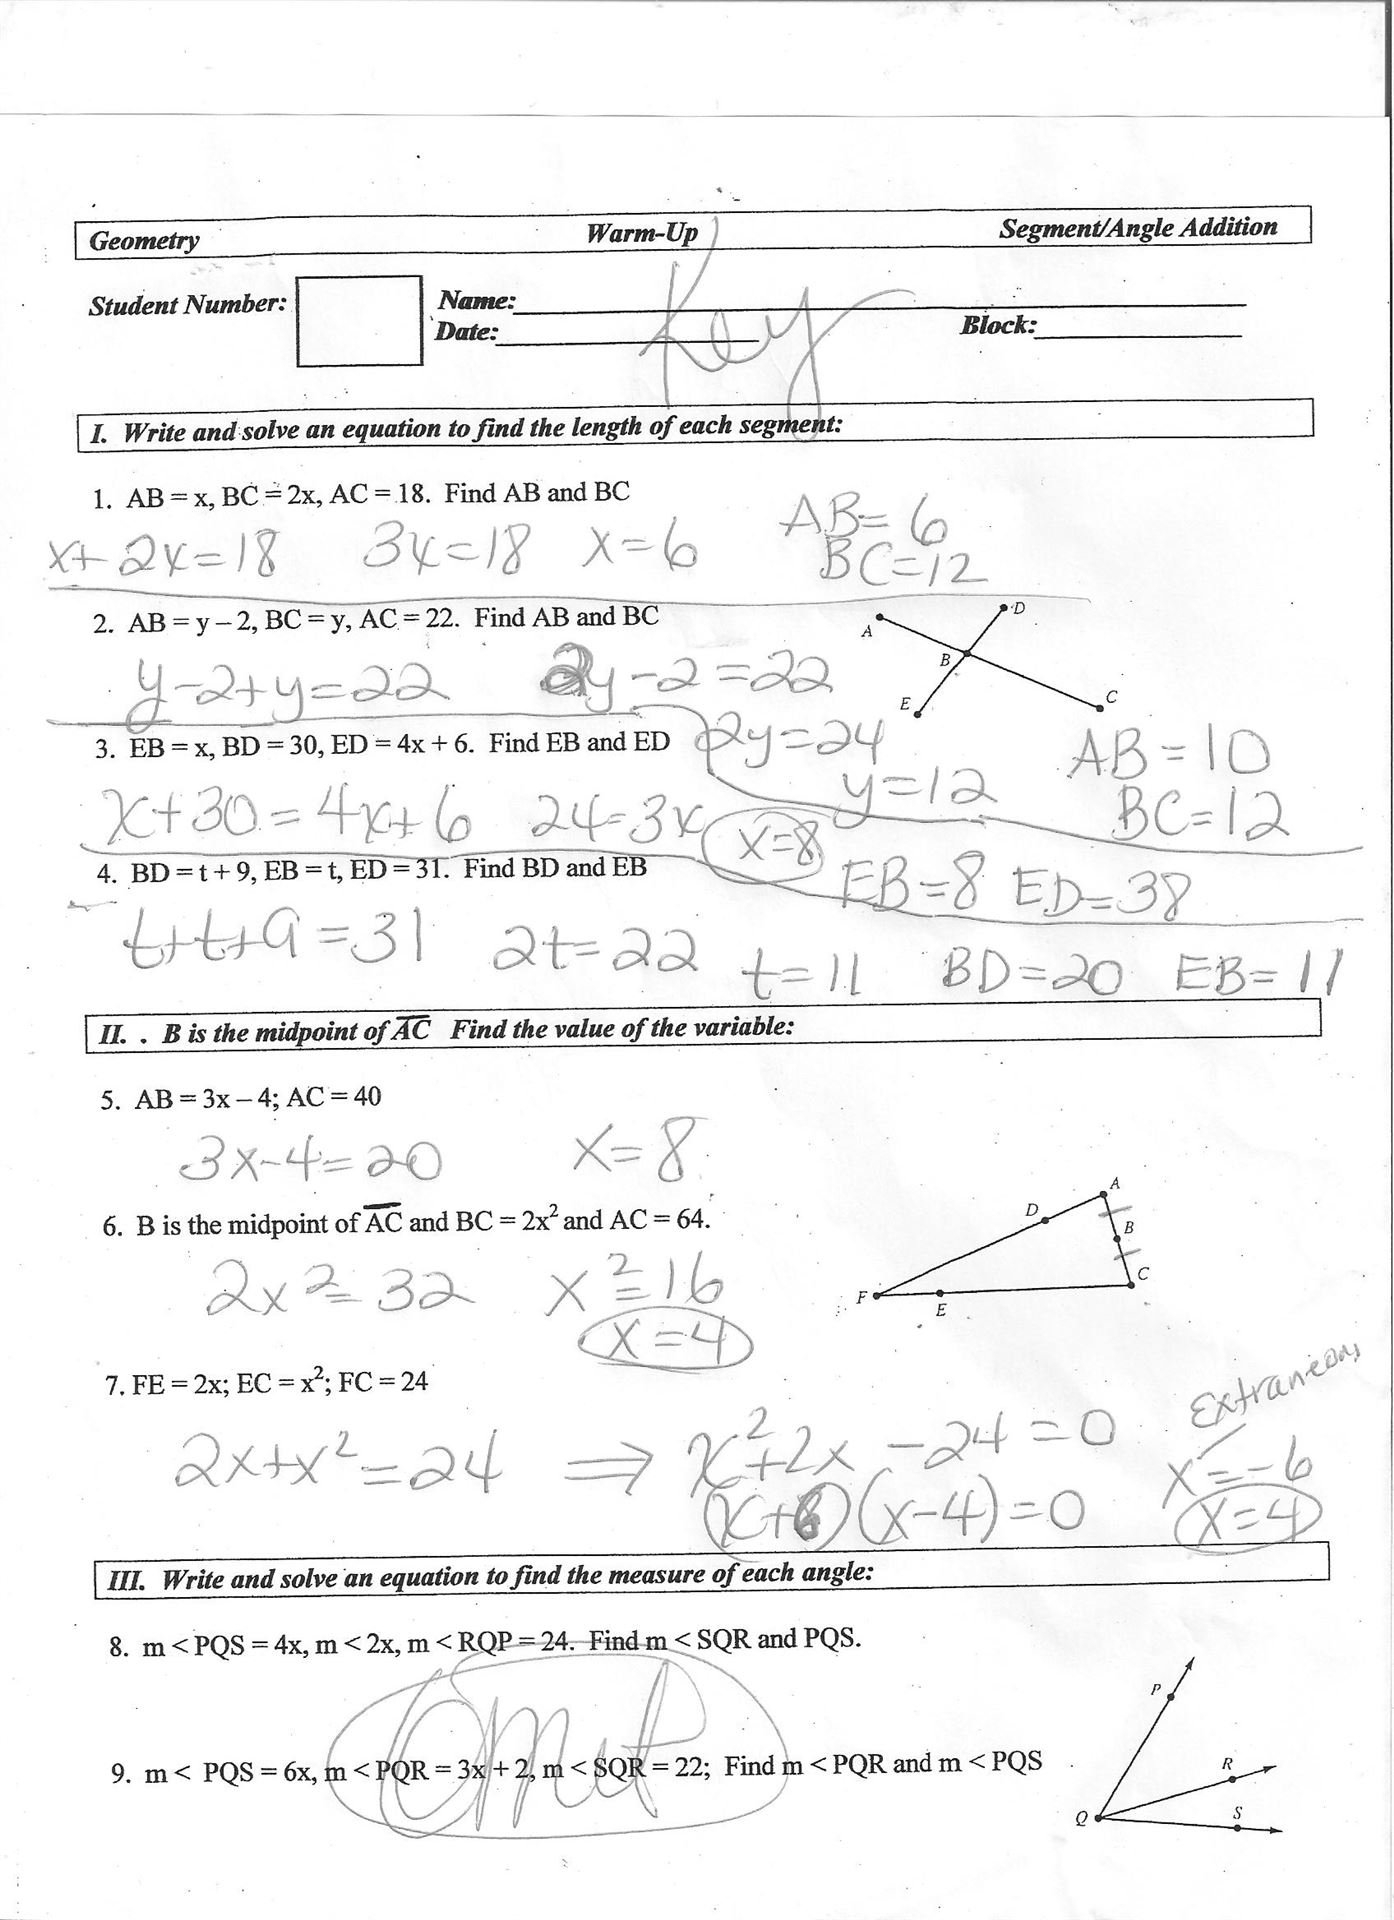 Guided Notes Segment And Angle Addition Puzzle Worksheet Answers Regarding Geometry Segment And Angle Addition Worksheet Answers